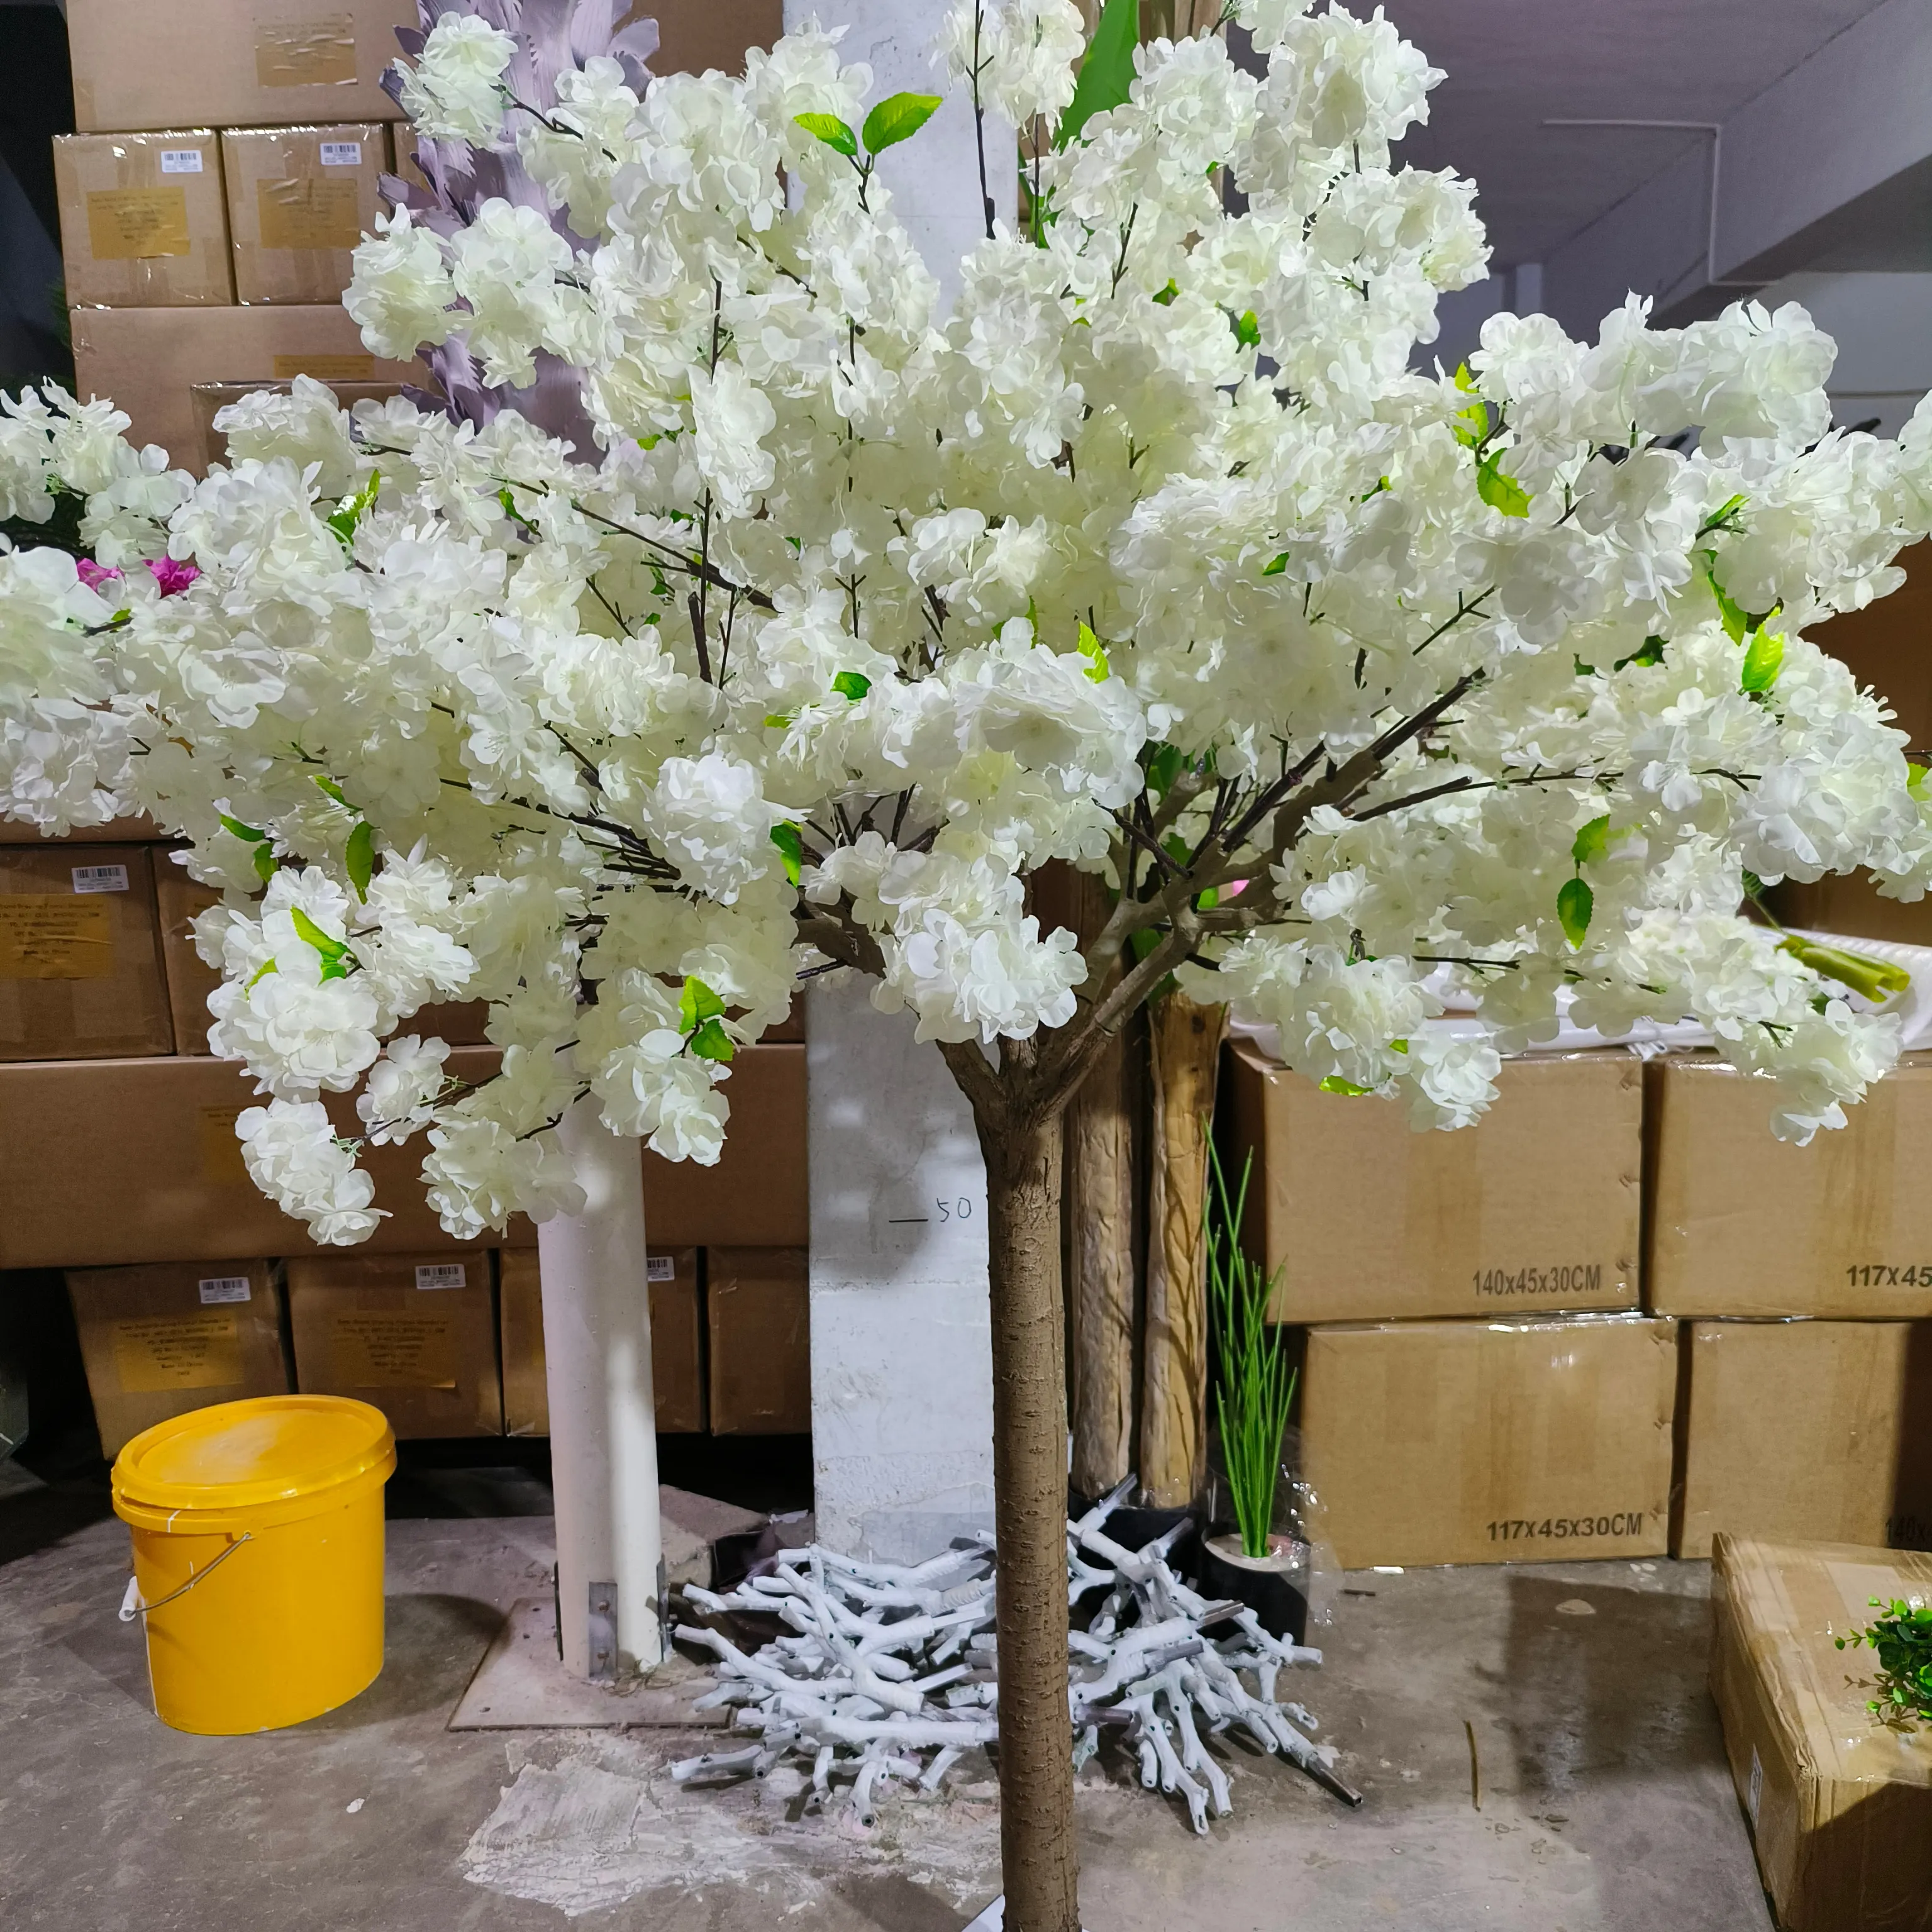 Indoor Plants Trees Flower Willow Large Decoration Wisteria Wedding Centerpiece Artificial Cherry Blossom Tree